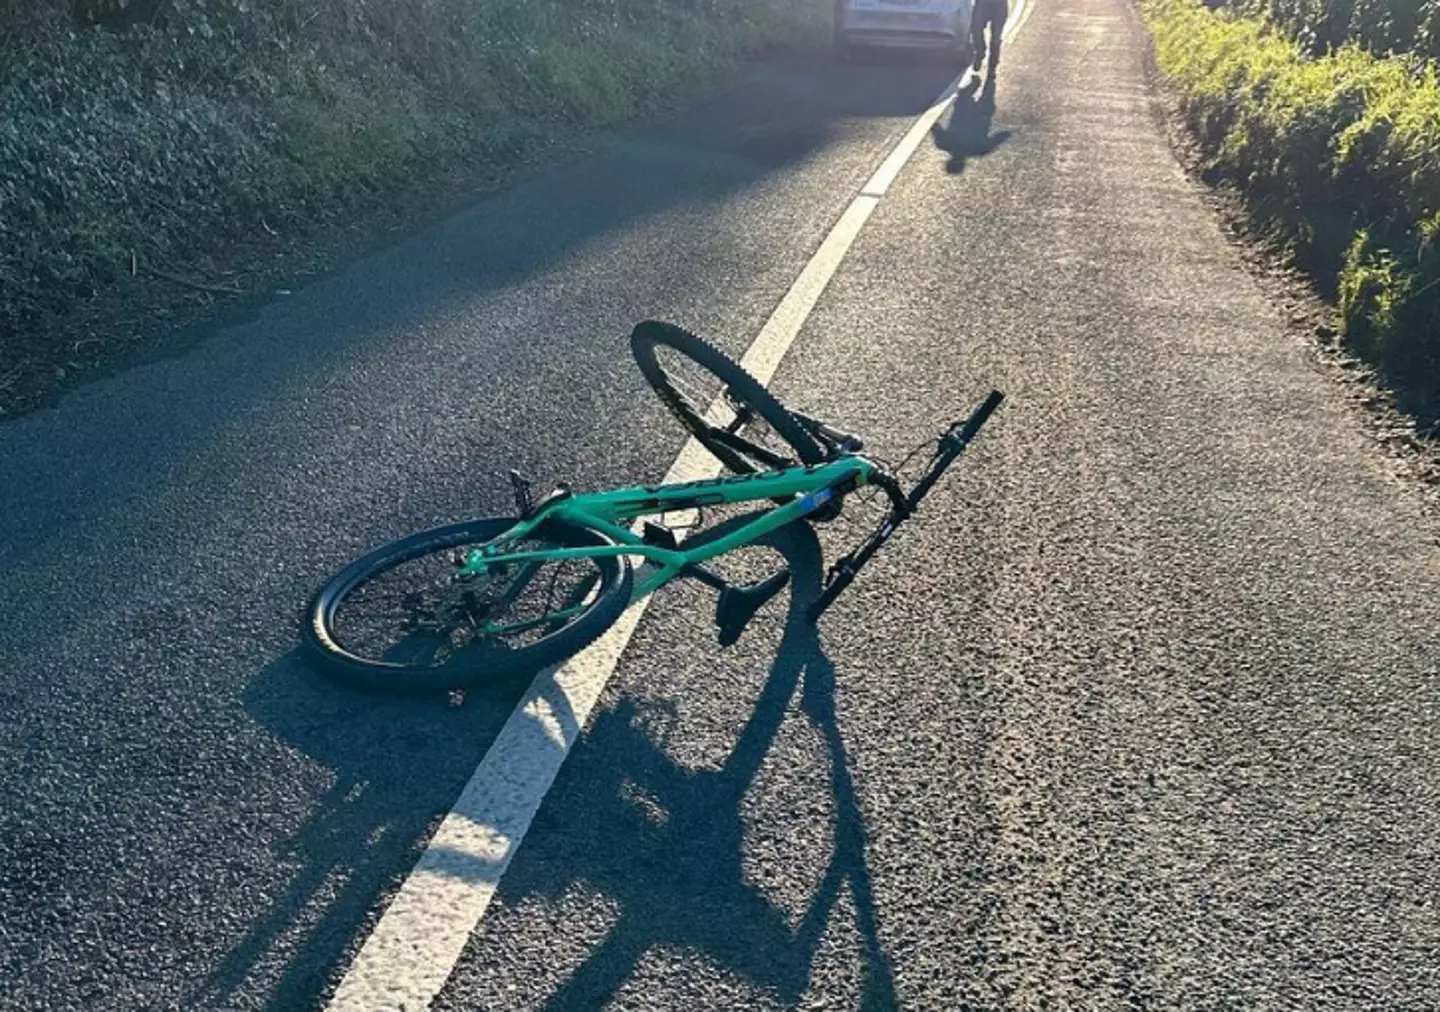 McGregor said his bike was 'f*cked' after the accident.